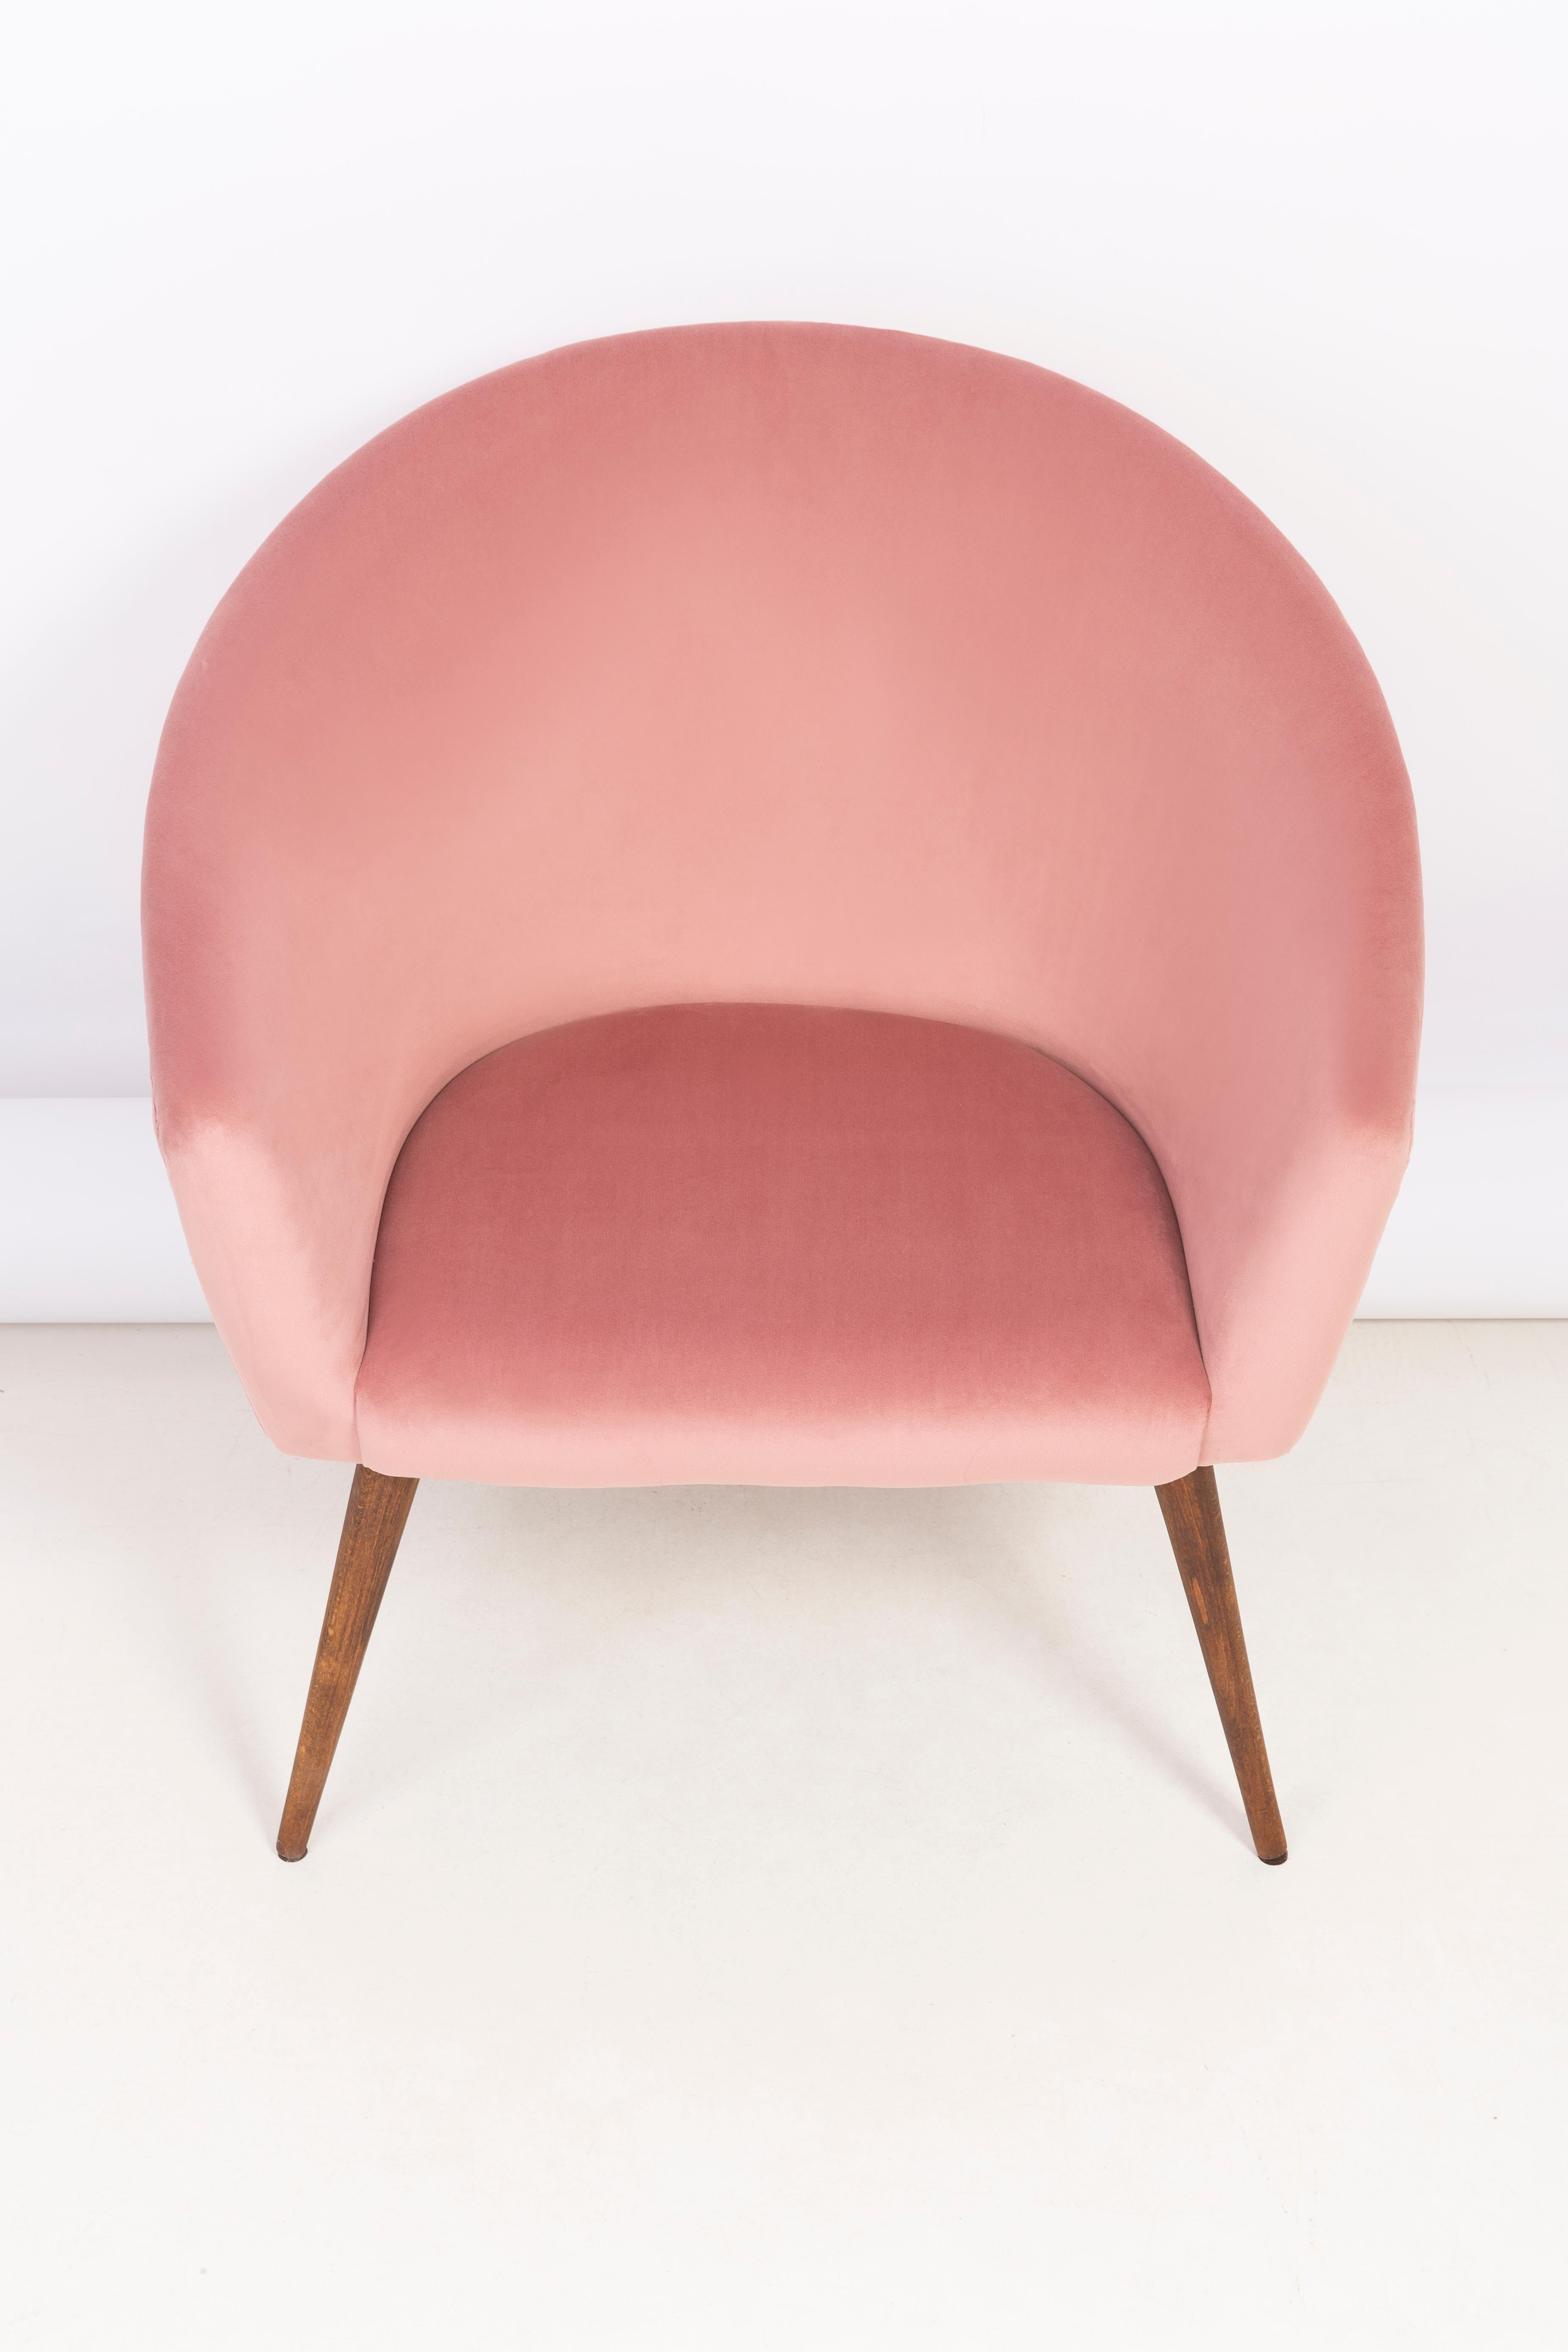 Set of Four of 20th Century Pink Velvet Shell Club Armchairs, 1960s For Sale 4